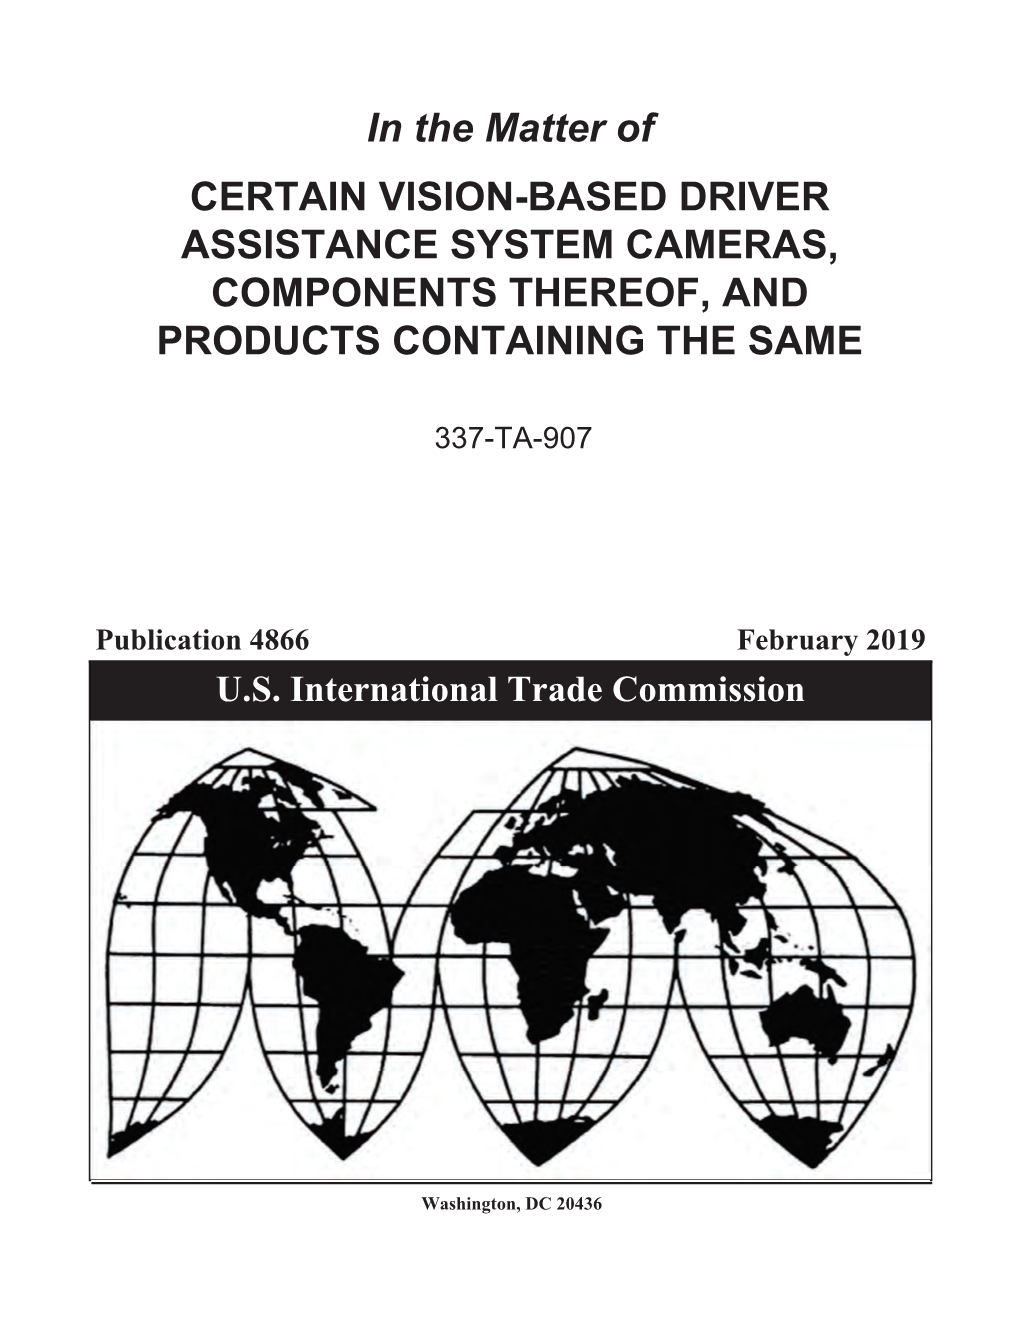 Certain Vision-Based Driver Assistance System Cameras, Components Thereof, and Products Containing the Same